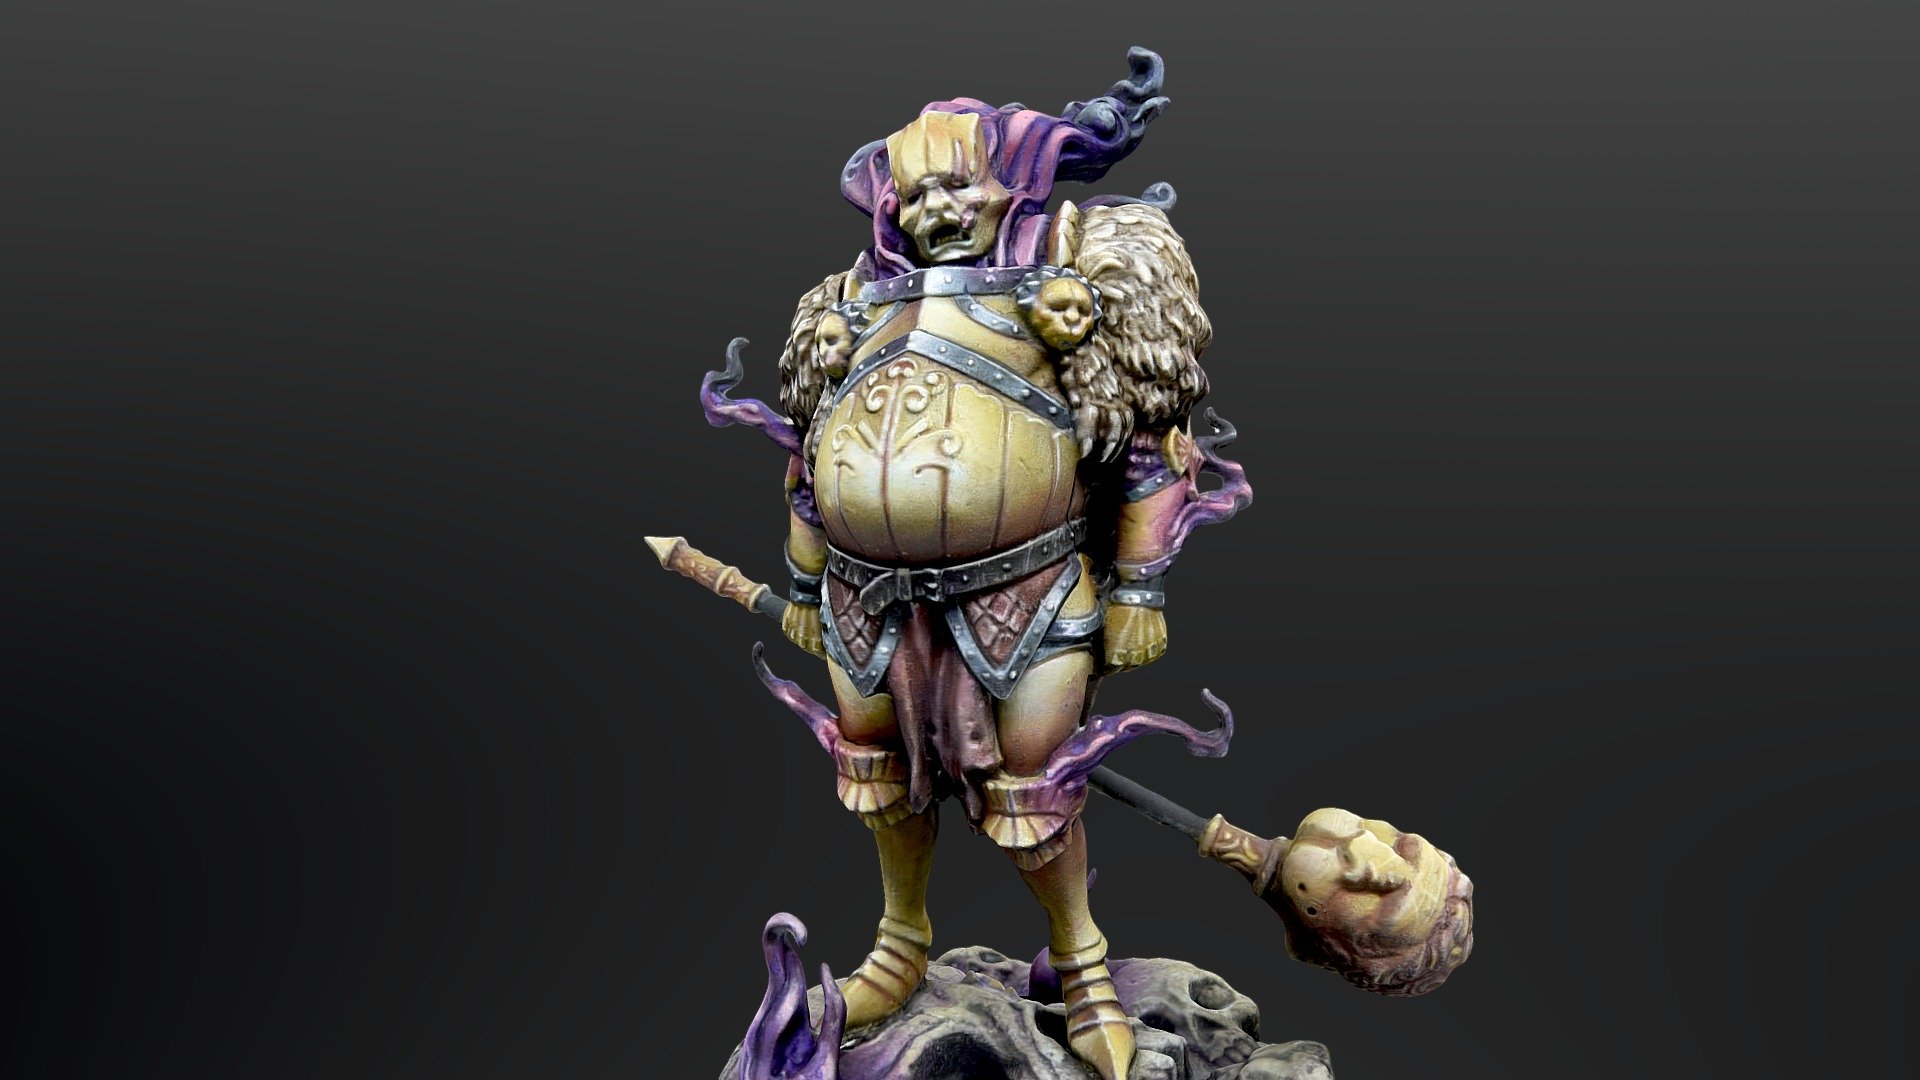 The Gold Smoke Knight miniature from Kingdom Death: Monster.

Reconstructed in metashape from 111 pictures 3d model